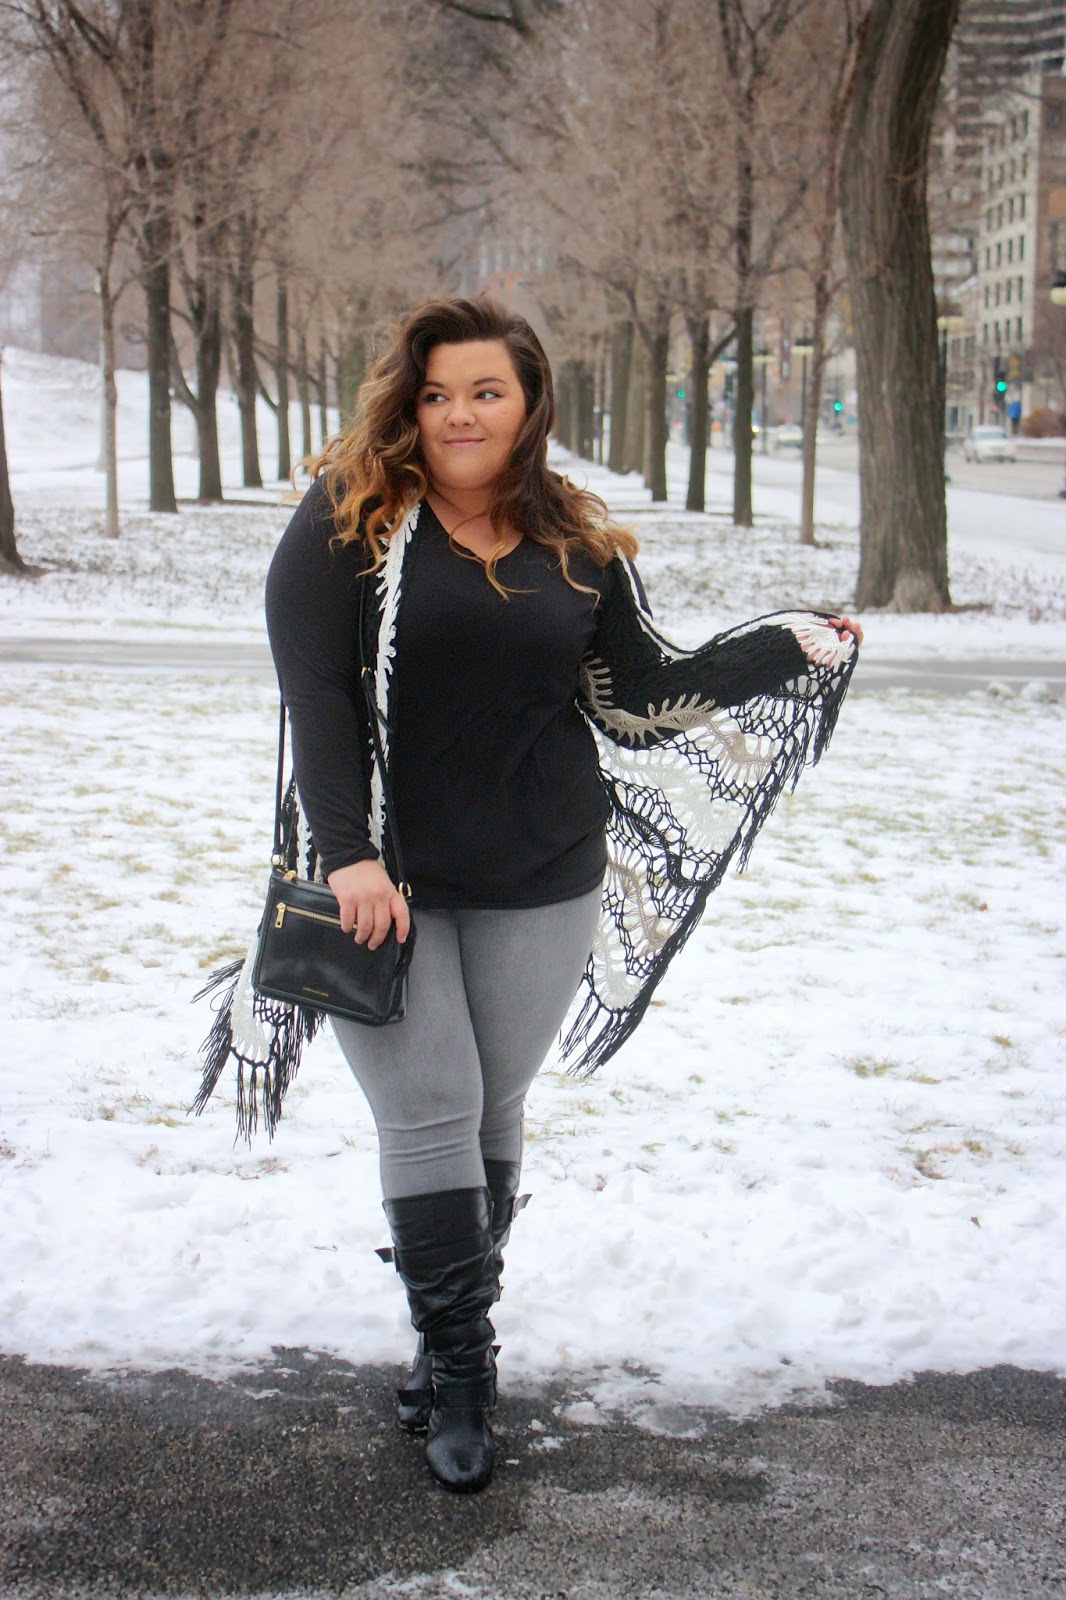 Natalie Craig, Natalie in The City, chicago, ootd, plus size fashion, fashion blogger, crochet vest, winter fashion 2015, mom fashion, curvy women, fatshion, gray jeans, curly ombre hair, thick girls, grant park, ralph lauren, lauren, wide calf boots, how to dress up a long sleeve shirt